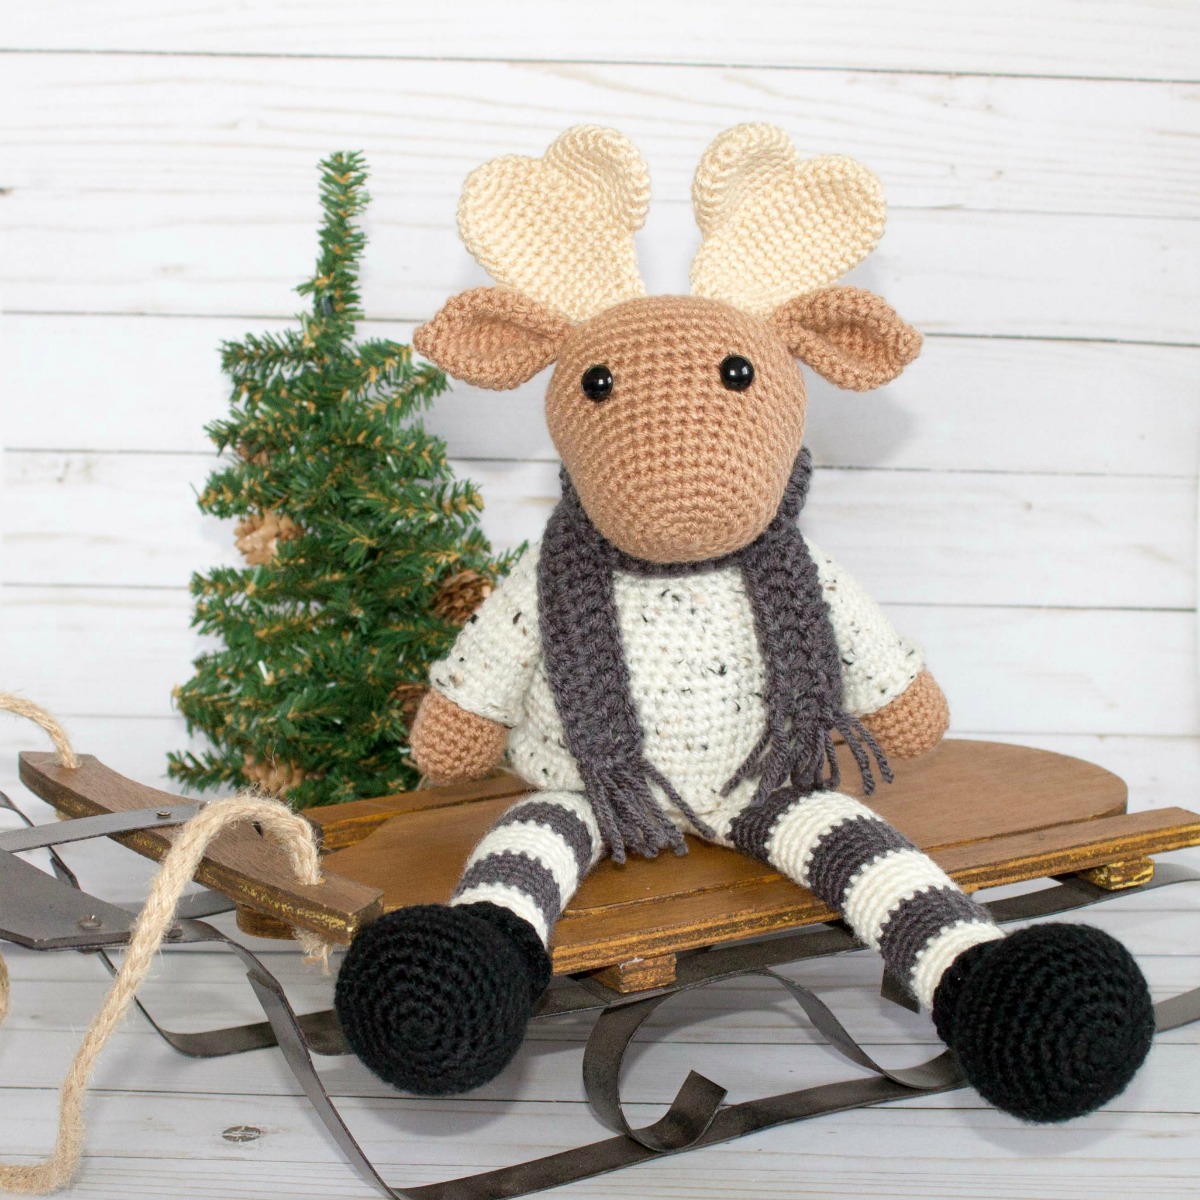 Crochet Moose - Fill this holiday season with crochet toy projects that will fill your home with more joy than ever before. #crochettoys #christmastoys #crochetamigurumi